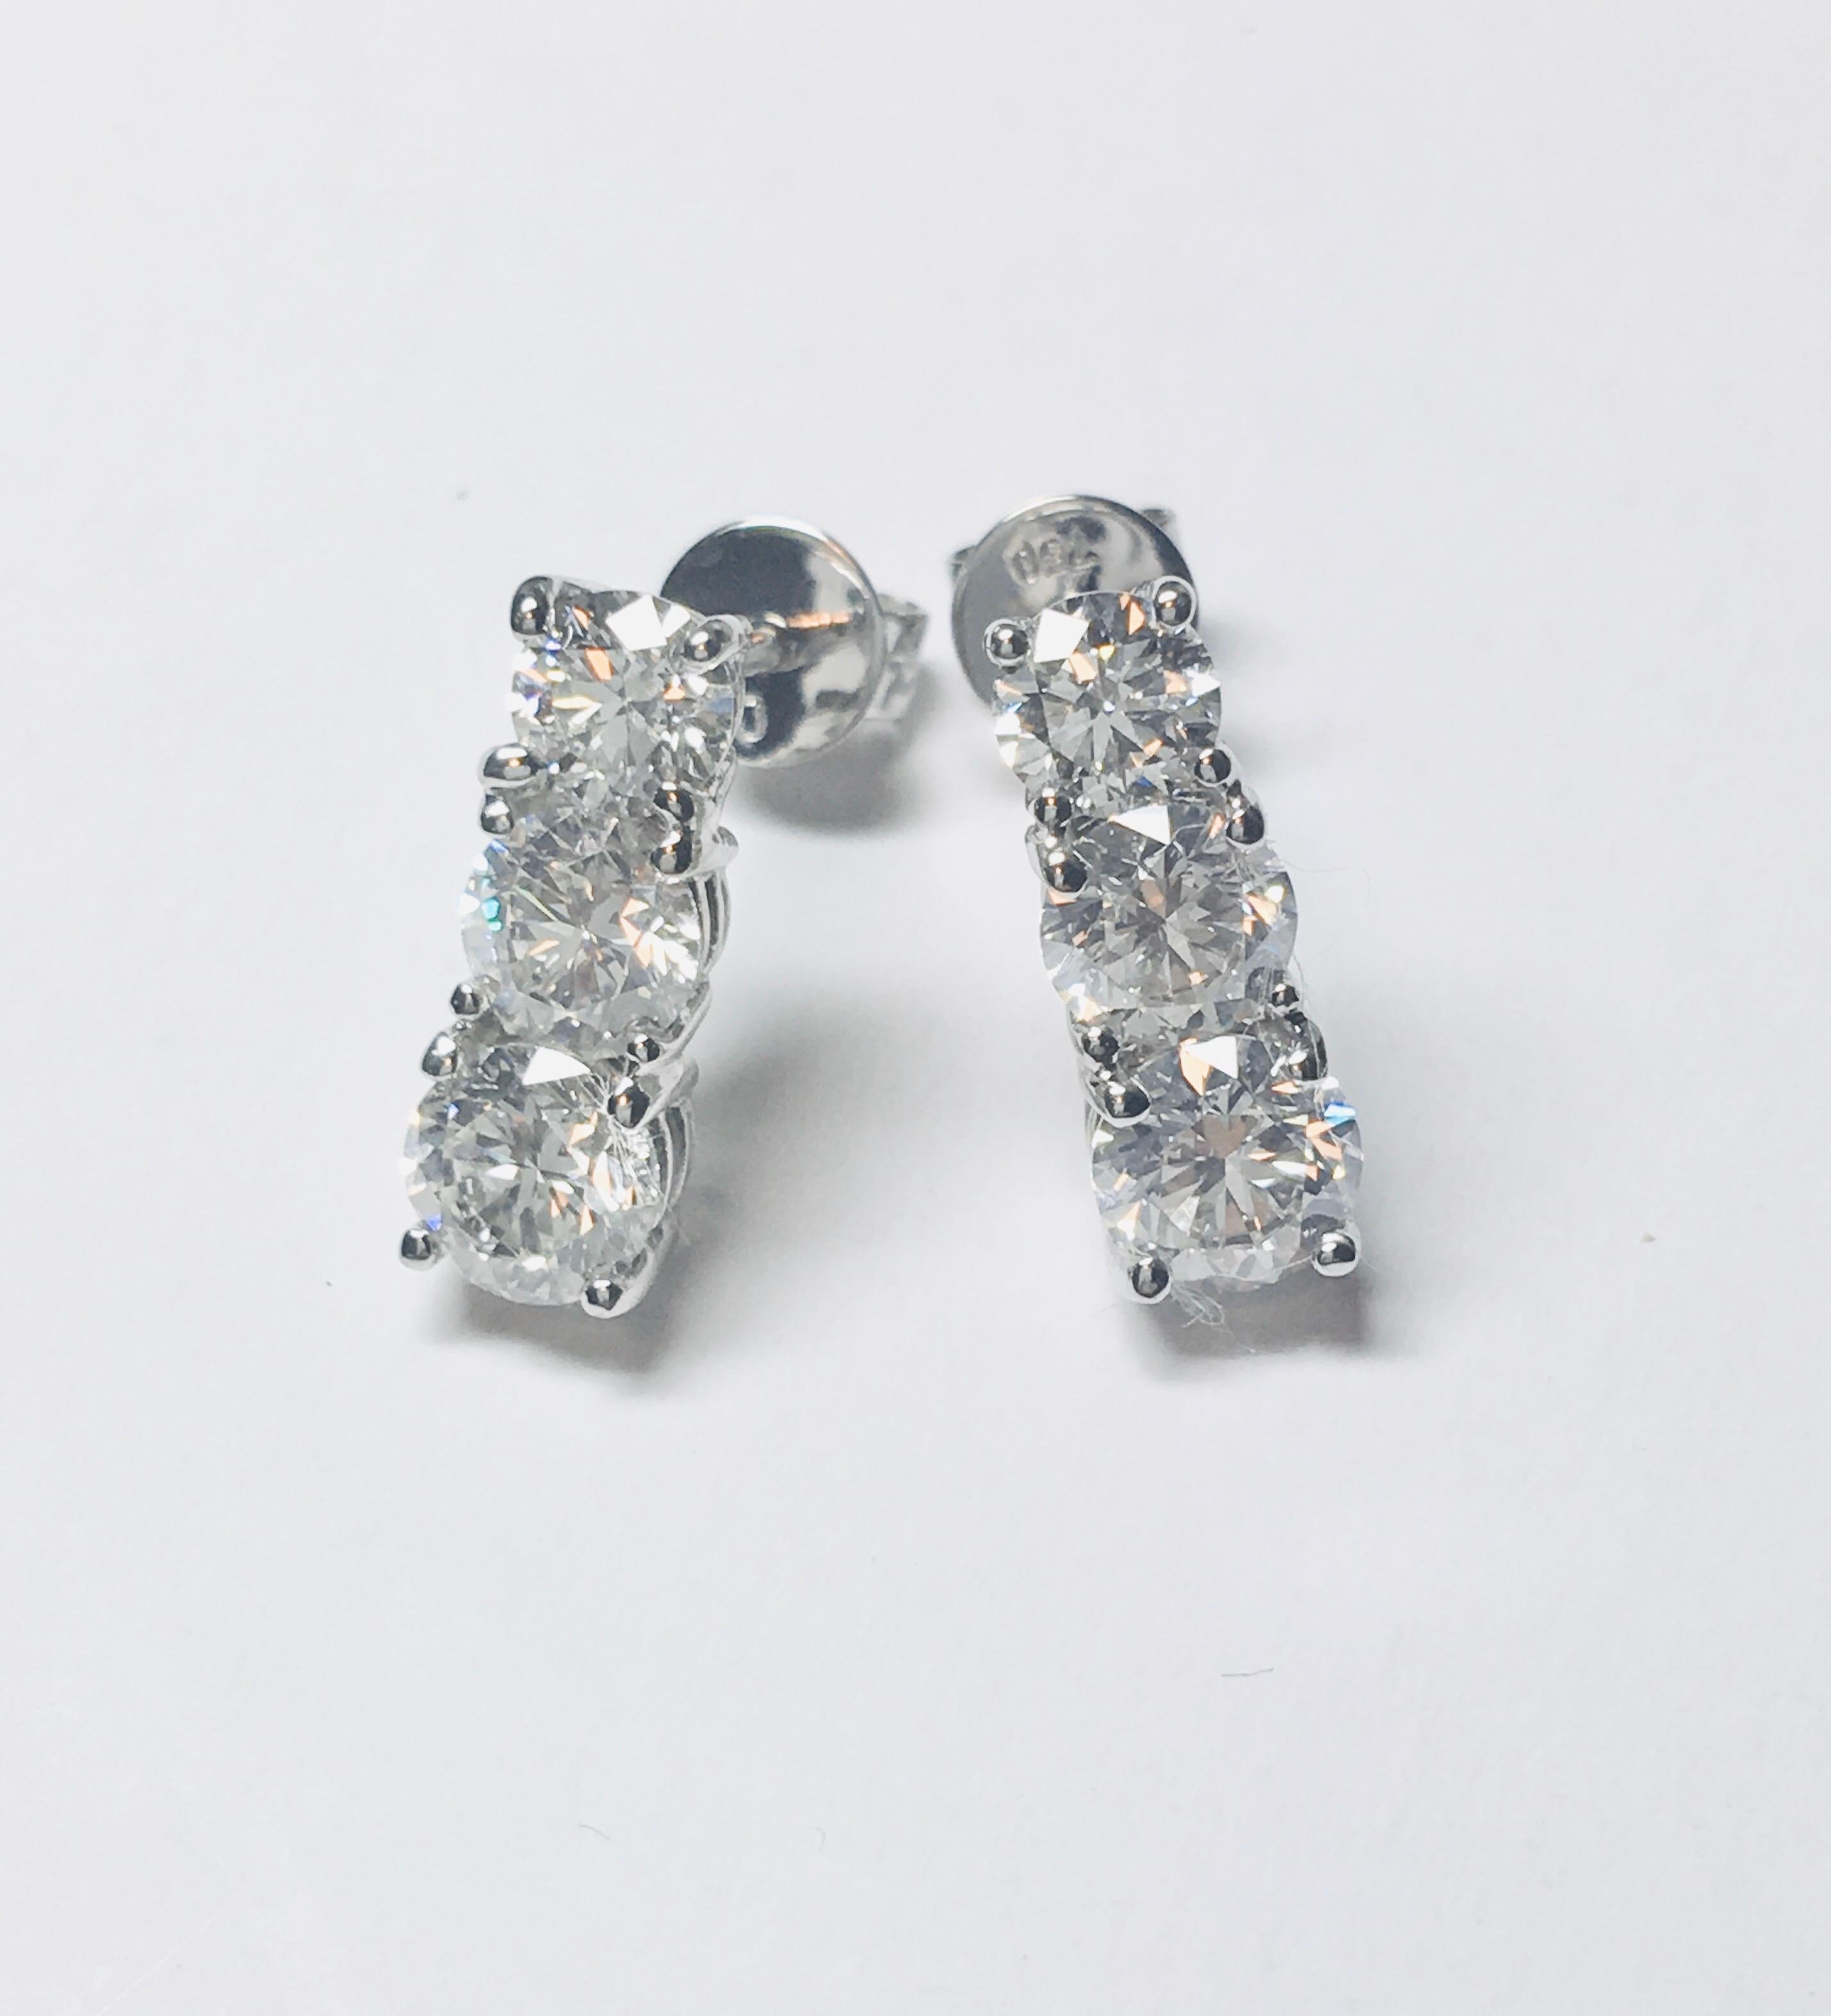 An impressive and versatile  pair of graduated round brilliant cut three-stone diamond drop earrings, featuring a total of over 1 carat diamond (1.10 carat) diamond colour white G/H clarity SI eye clean, each stone is set in a classic 4 claw mount